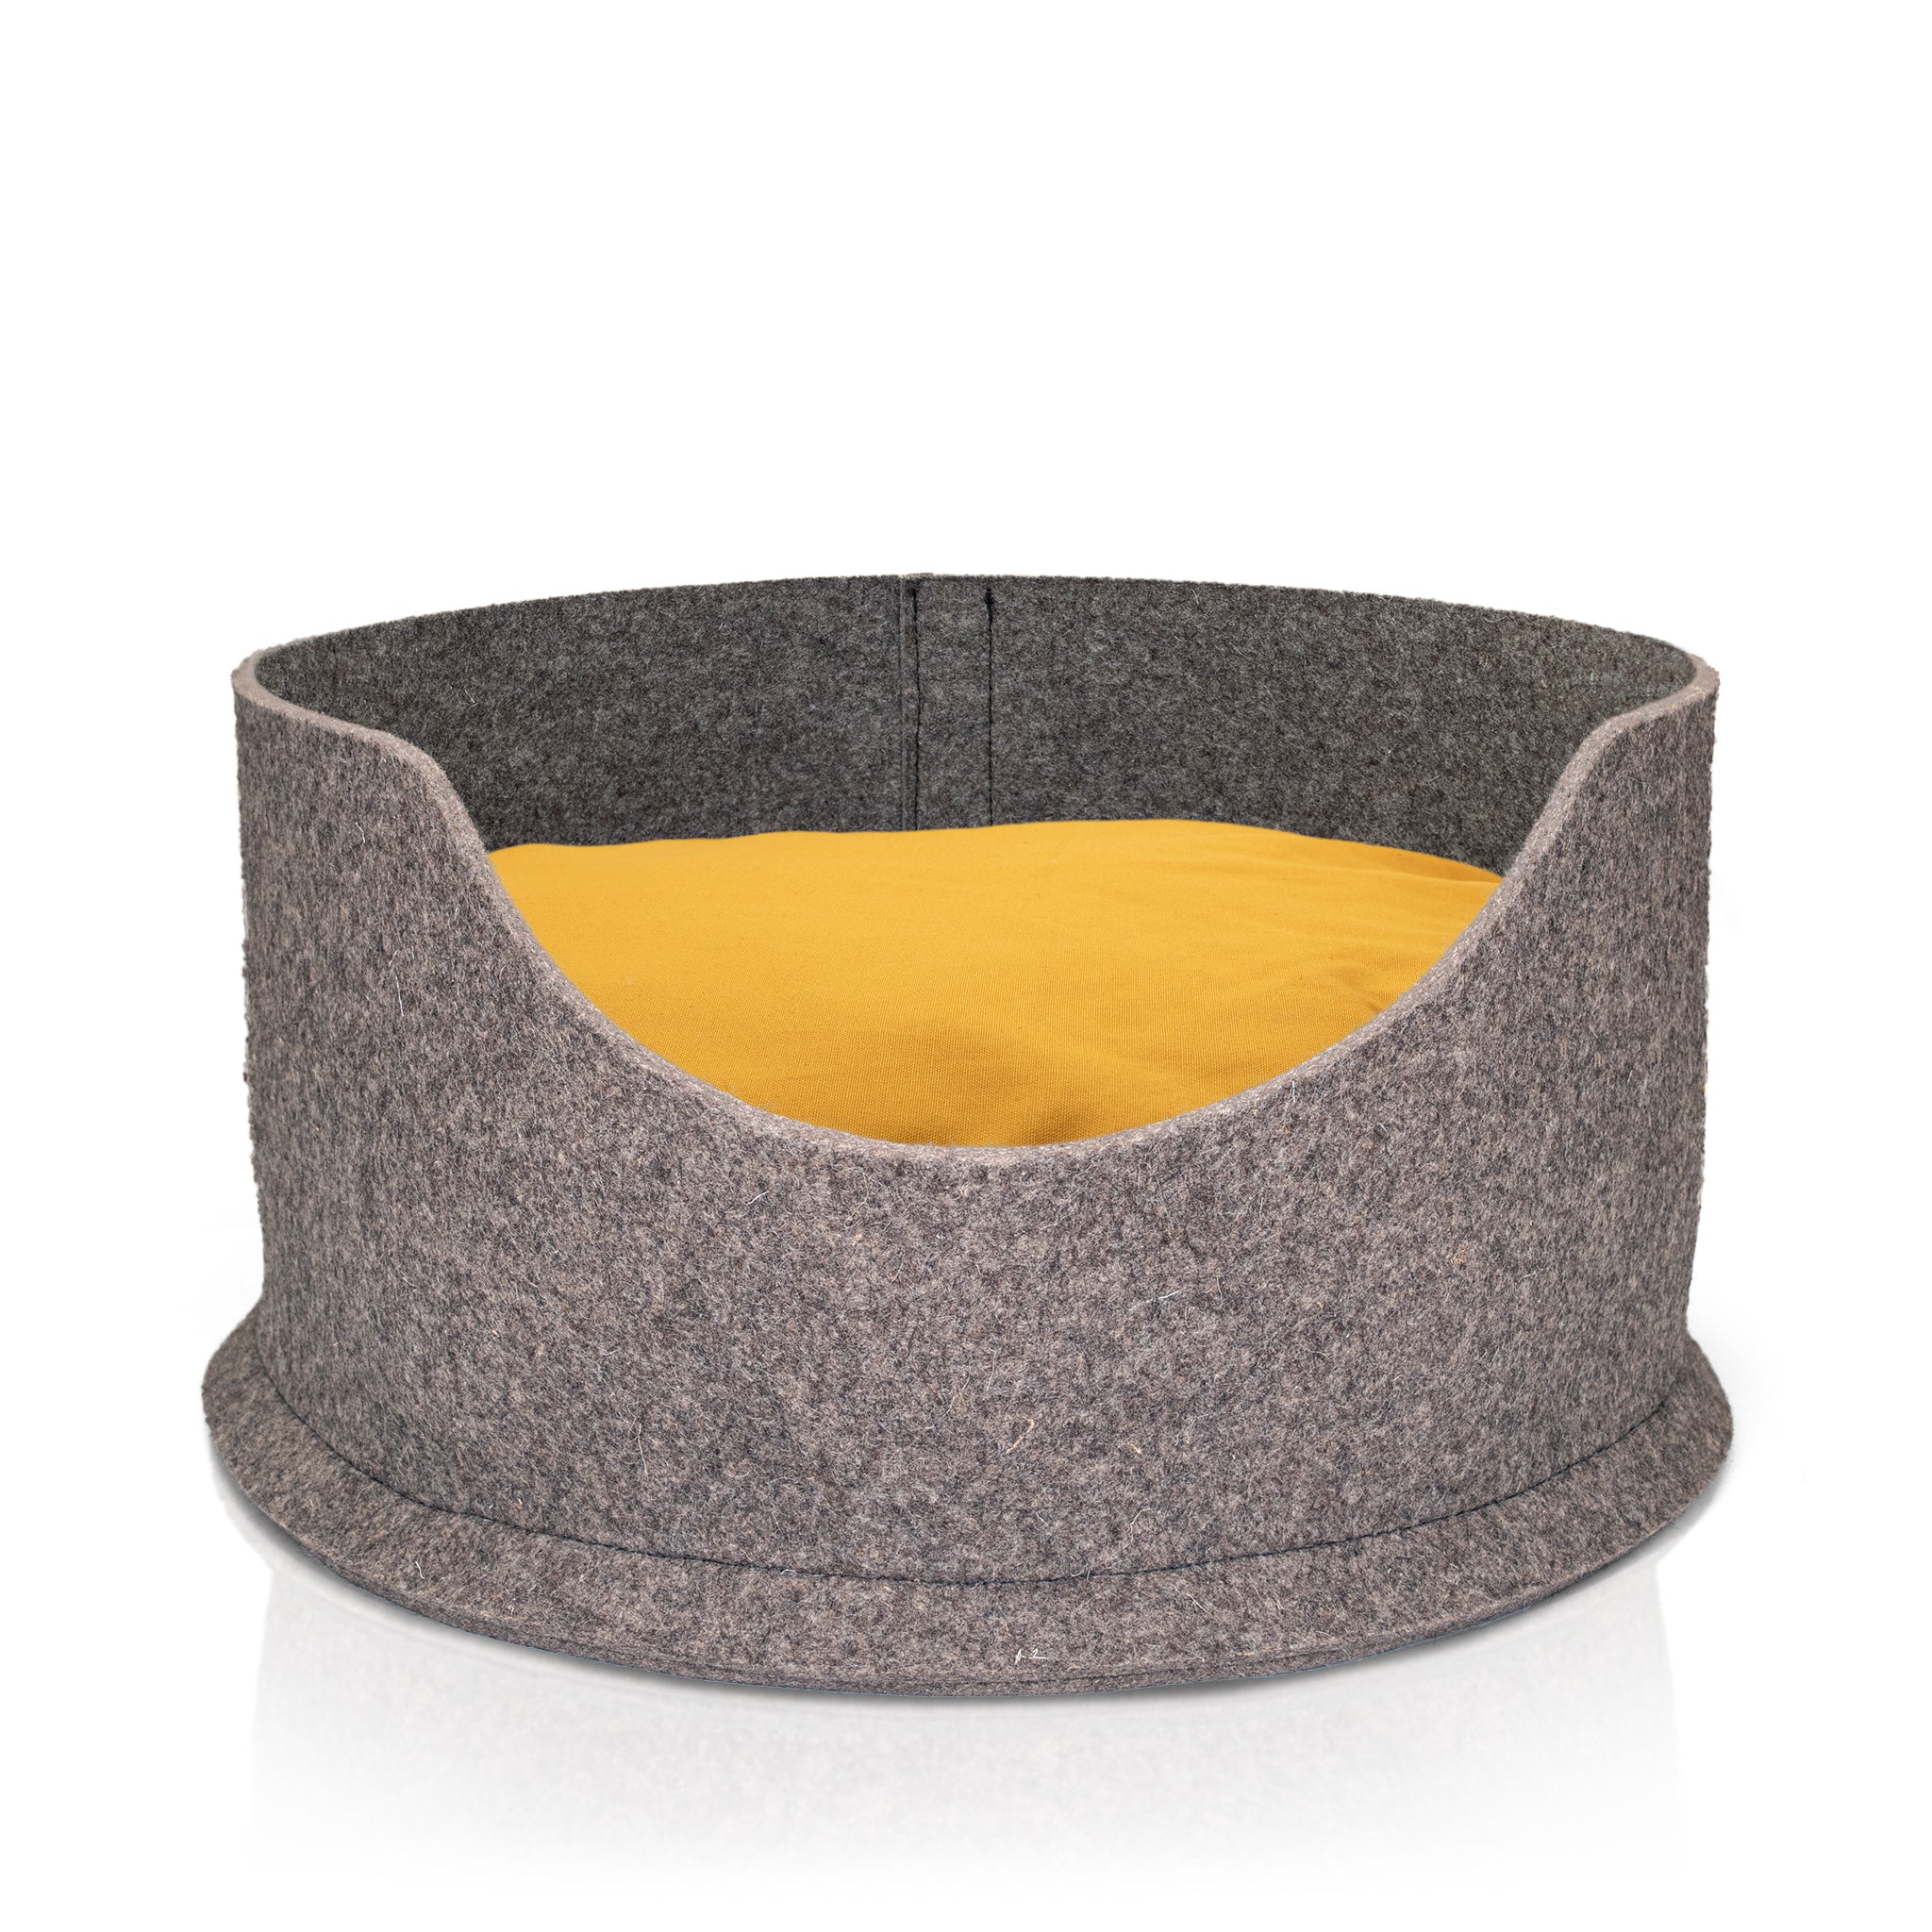 Felted cat bed for dogs and cats, with a bright yellow, eco-friendly cushion